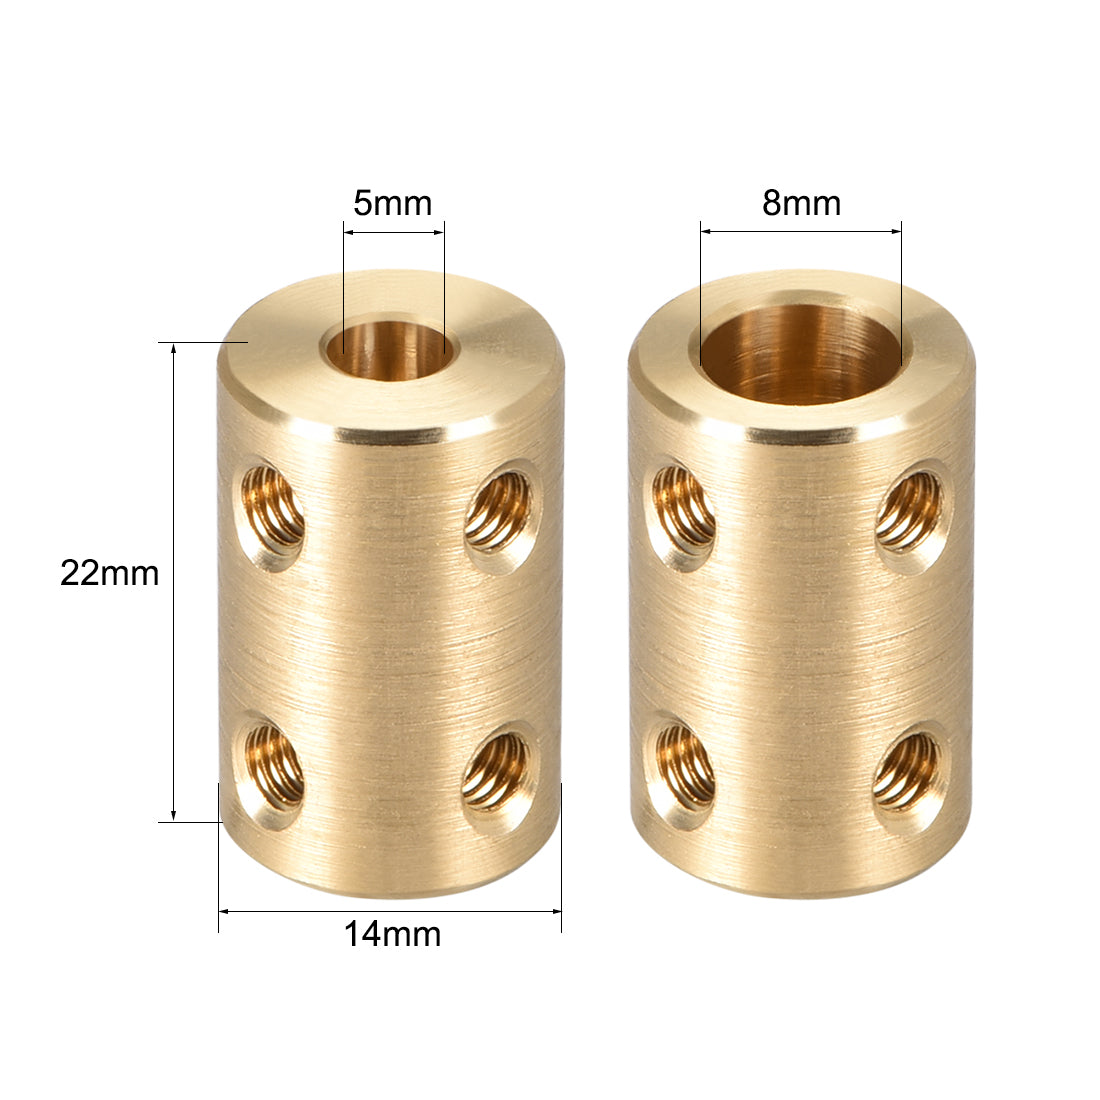 uxcell Uxcell Shaft Coupling 5mm to 8mm Bore L22xD14 Robot Motor Wheel Rigid Coupler Connector Gold Tone 2 Pcs